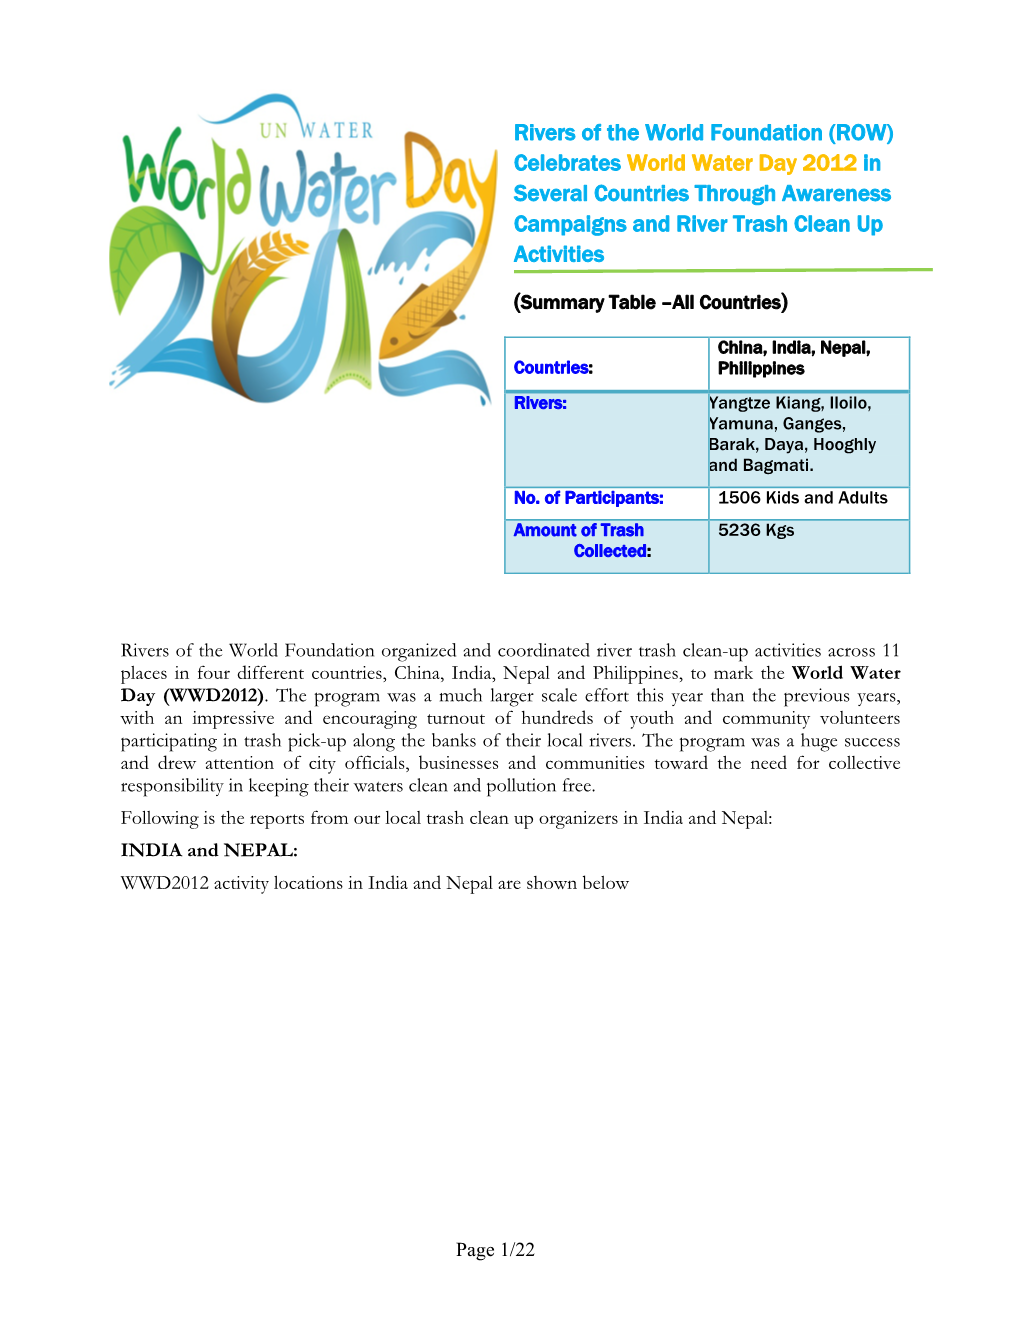 Rivers of the World Foundation (ROW) Celebrates World Water Day 2012 in Several Countries Through Awareness Campaigns and River Trash Clean up Activities